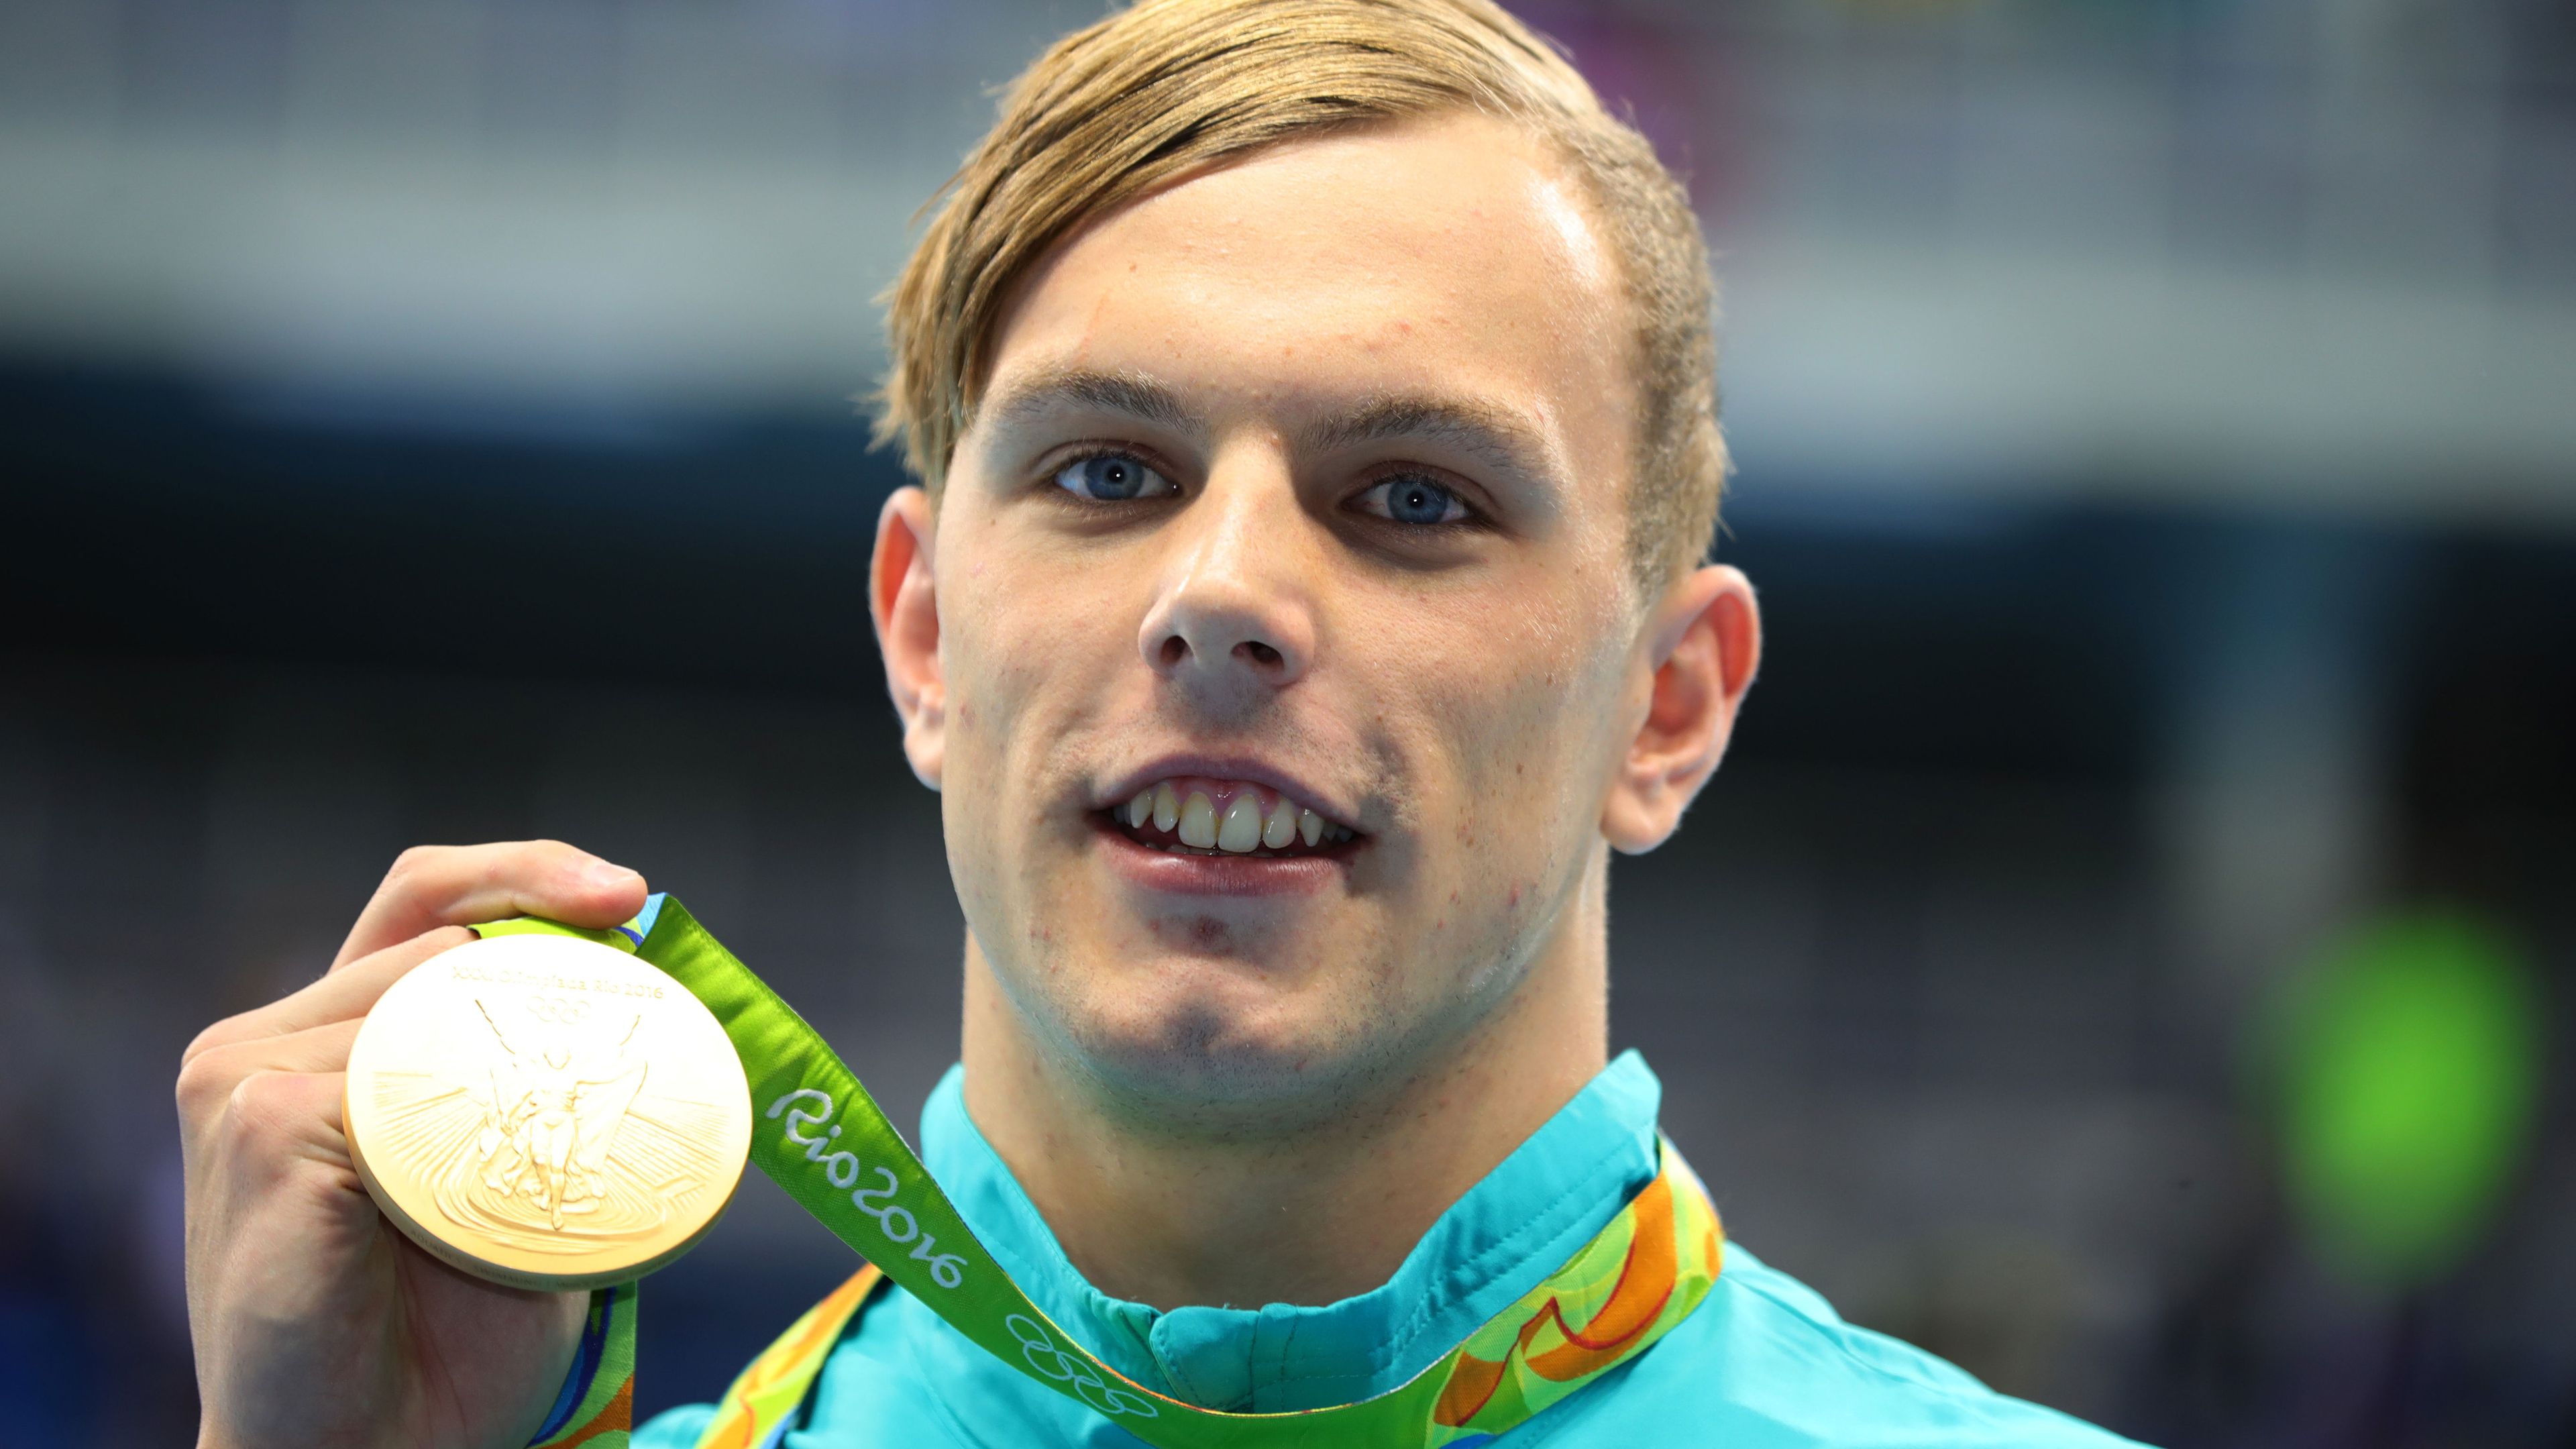 Kyle Chalmers after winning gold in the 100m freestyle at the Rio Olympics.